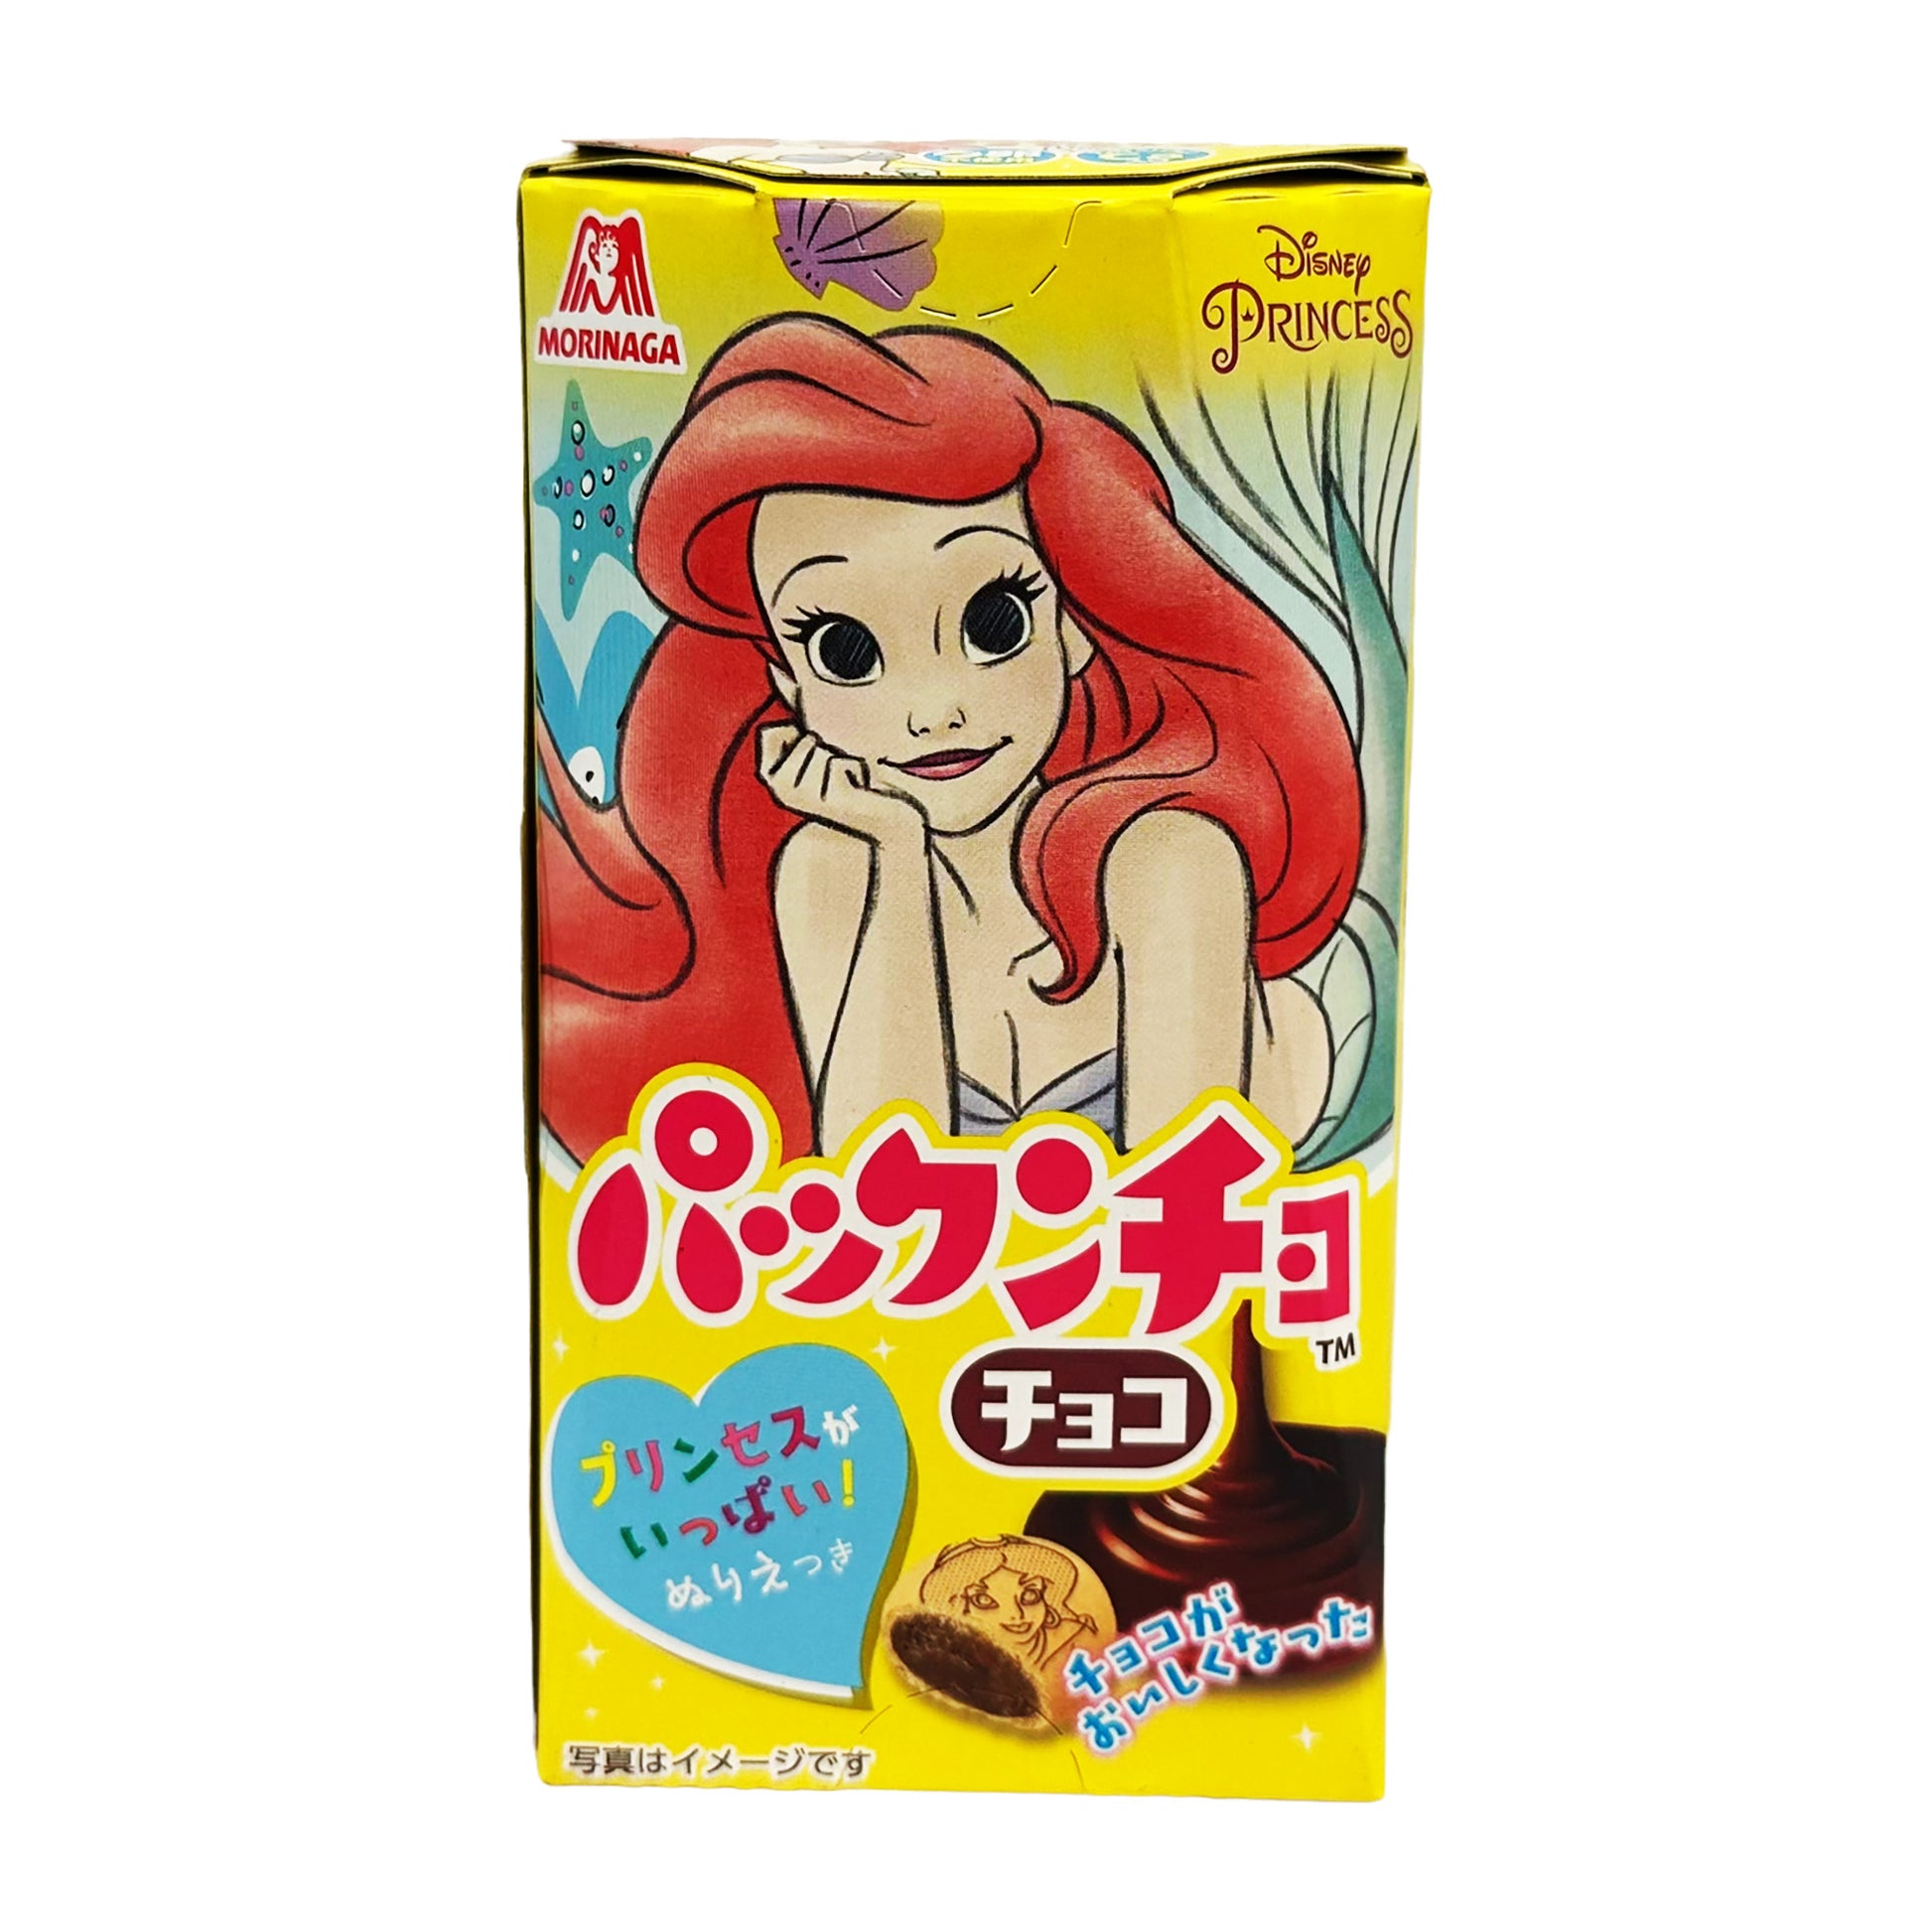 Front graphic image of Morinaga Pakkuncho Filled Biscuits - Choco Flavor 1.6oz (43g)